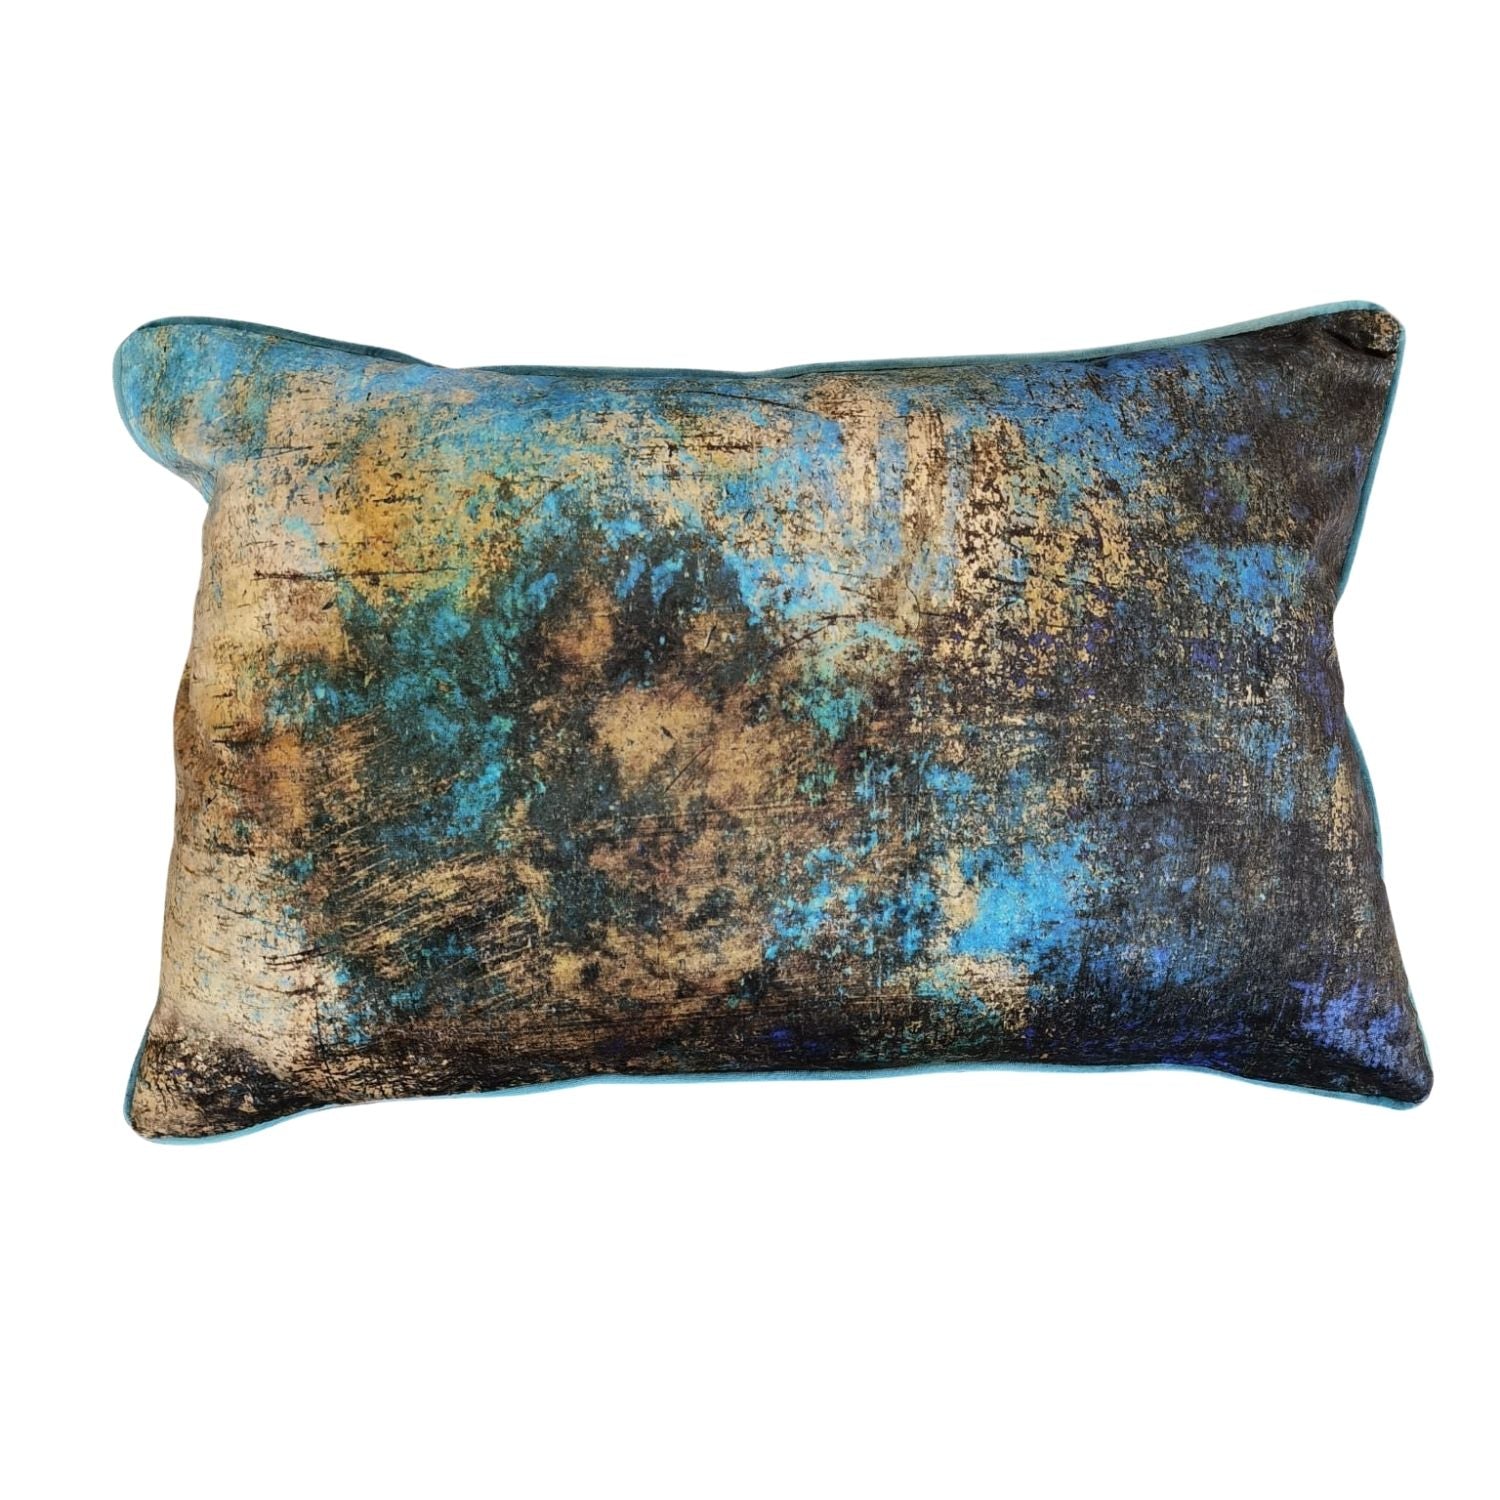 The Home Living Room Printed Piped Cushion - Blue &amp; Gold 1 Shaws Department Stores